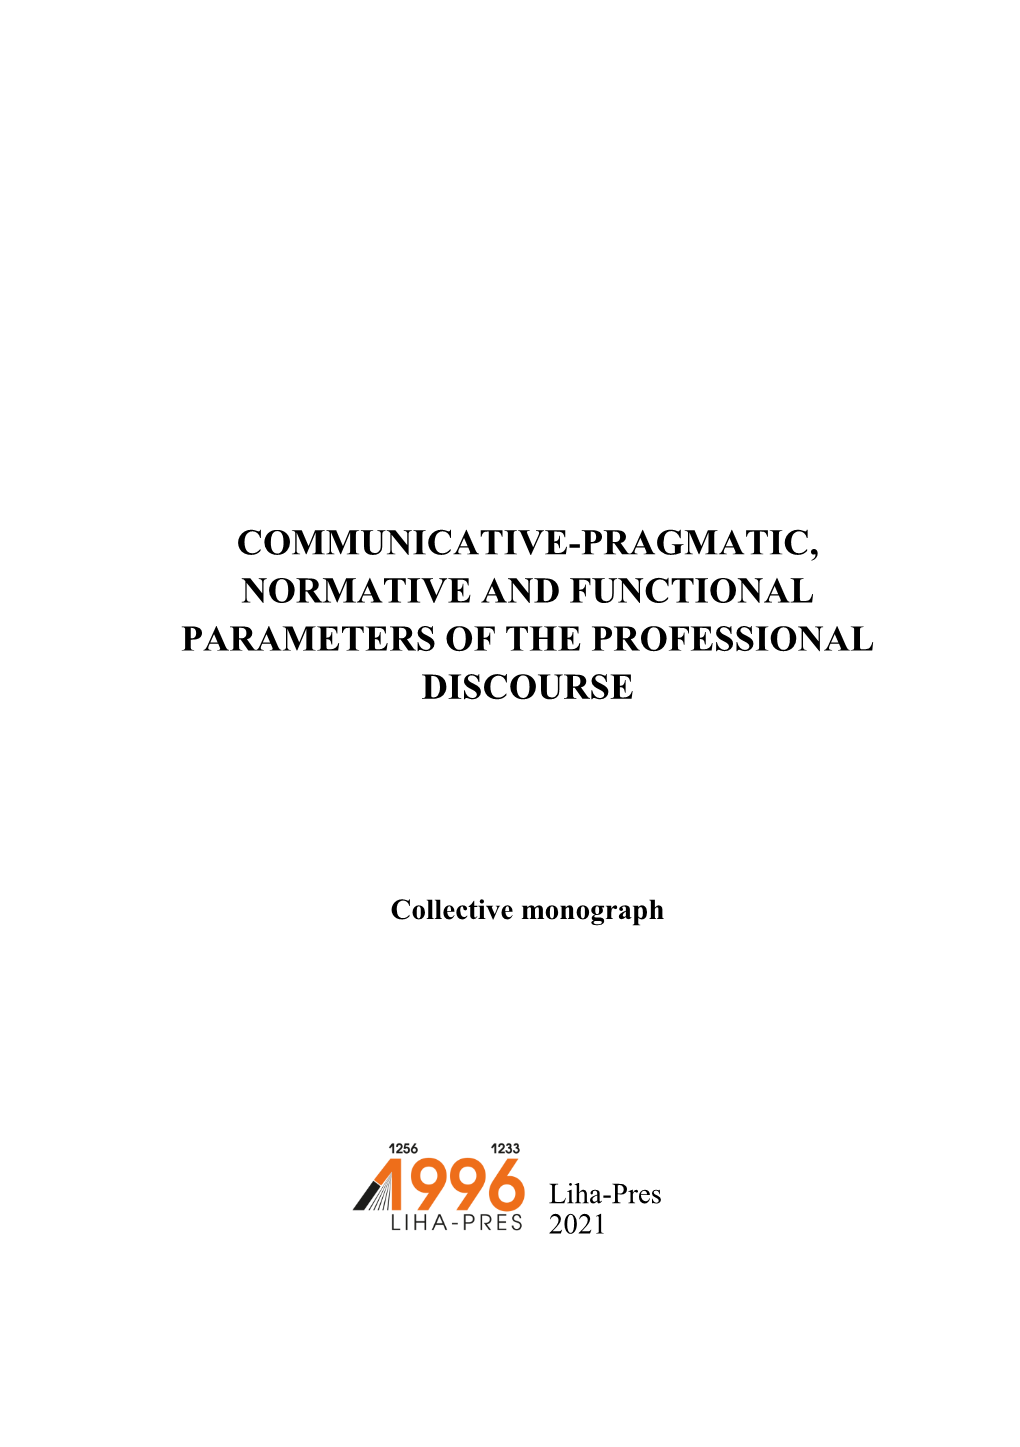 Communicative-Pragmatic, Normative and Functional Parameters of the Professional Discourse